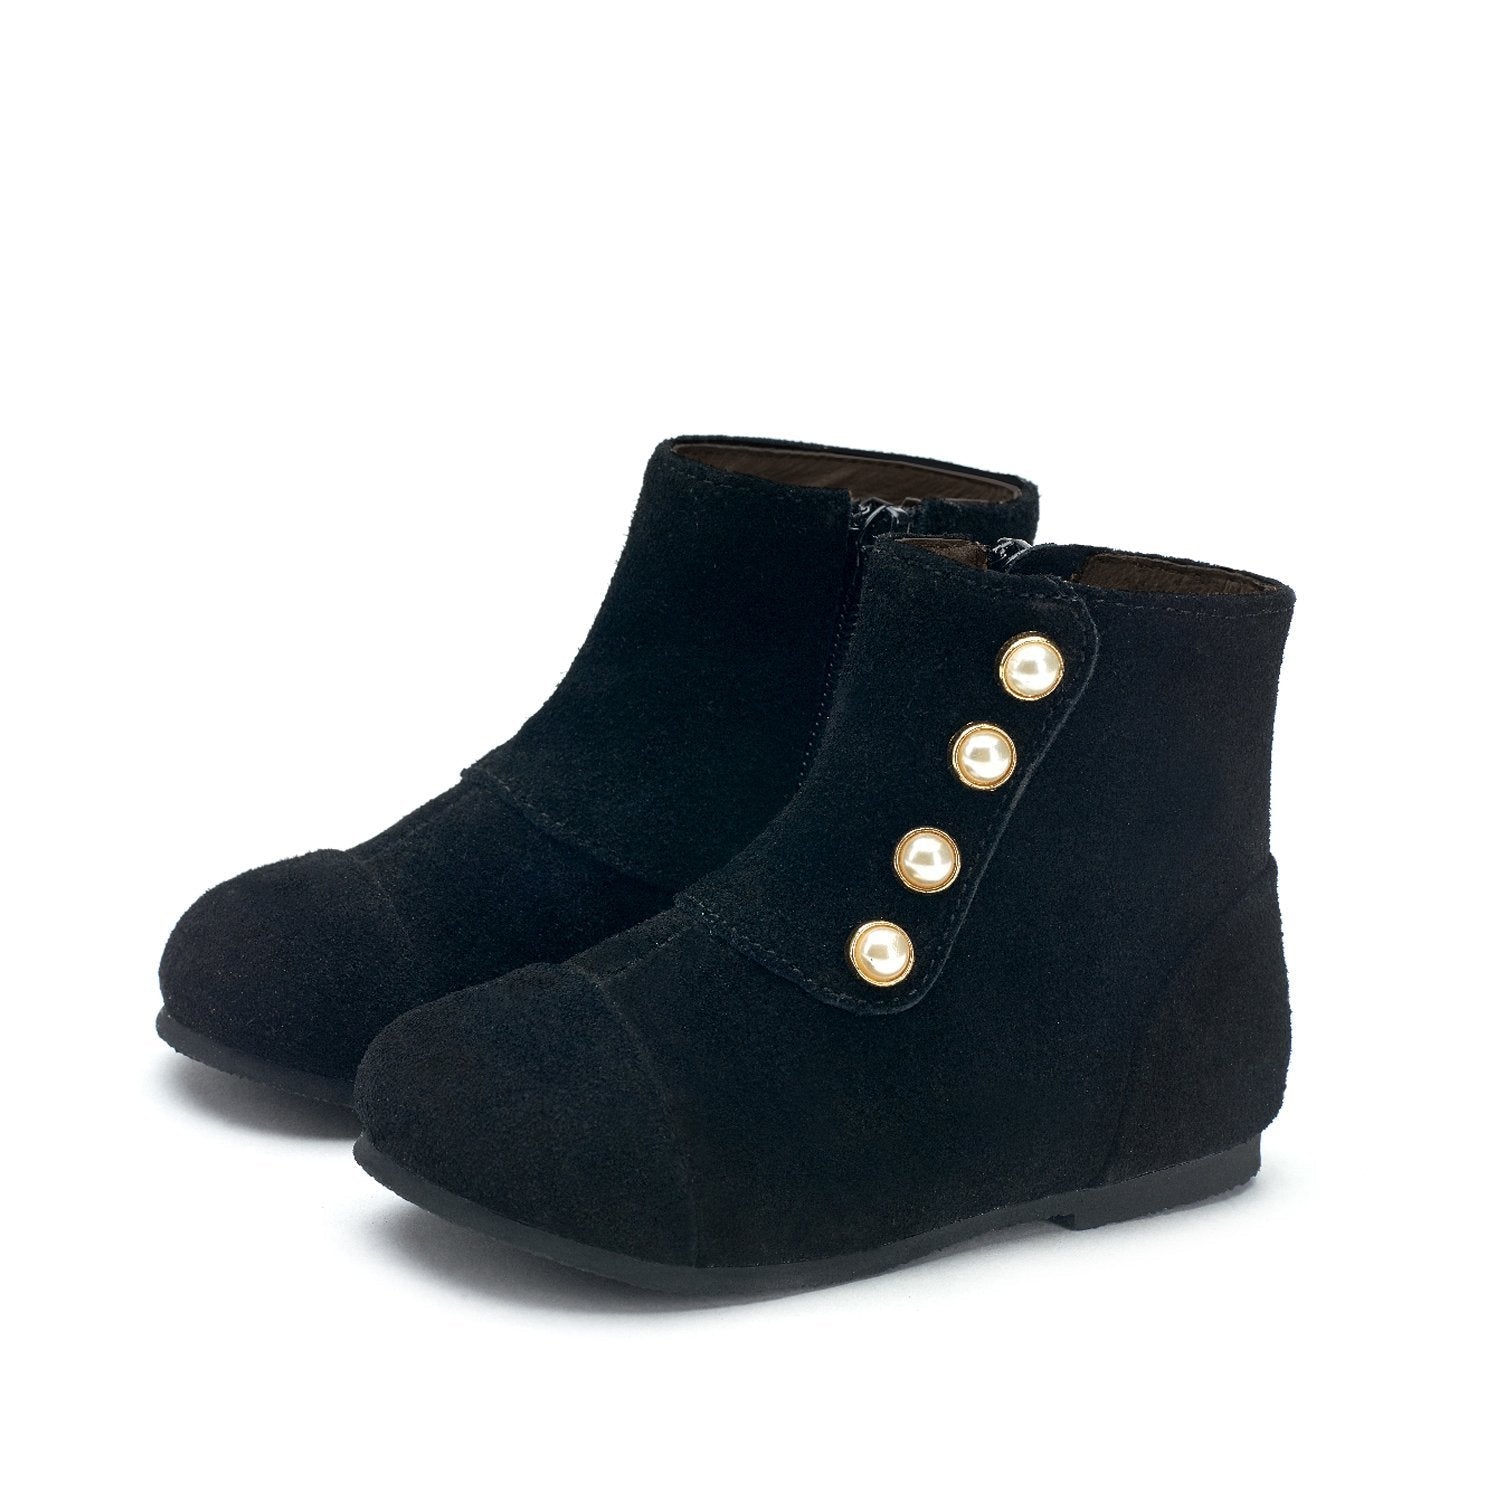 Natalie Black Boots by Age of Innocence